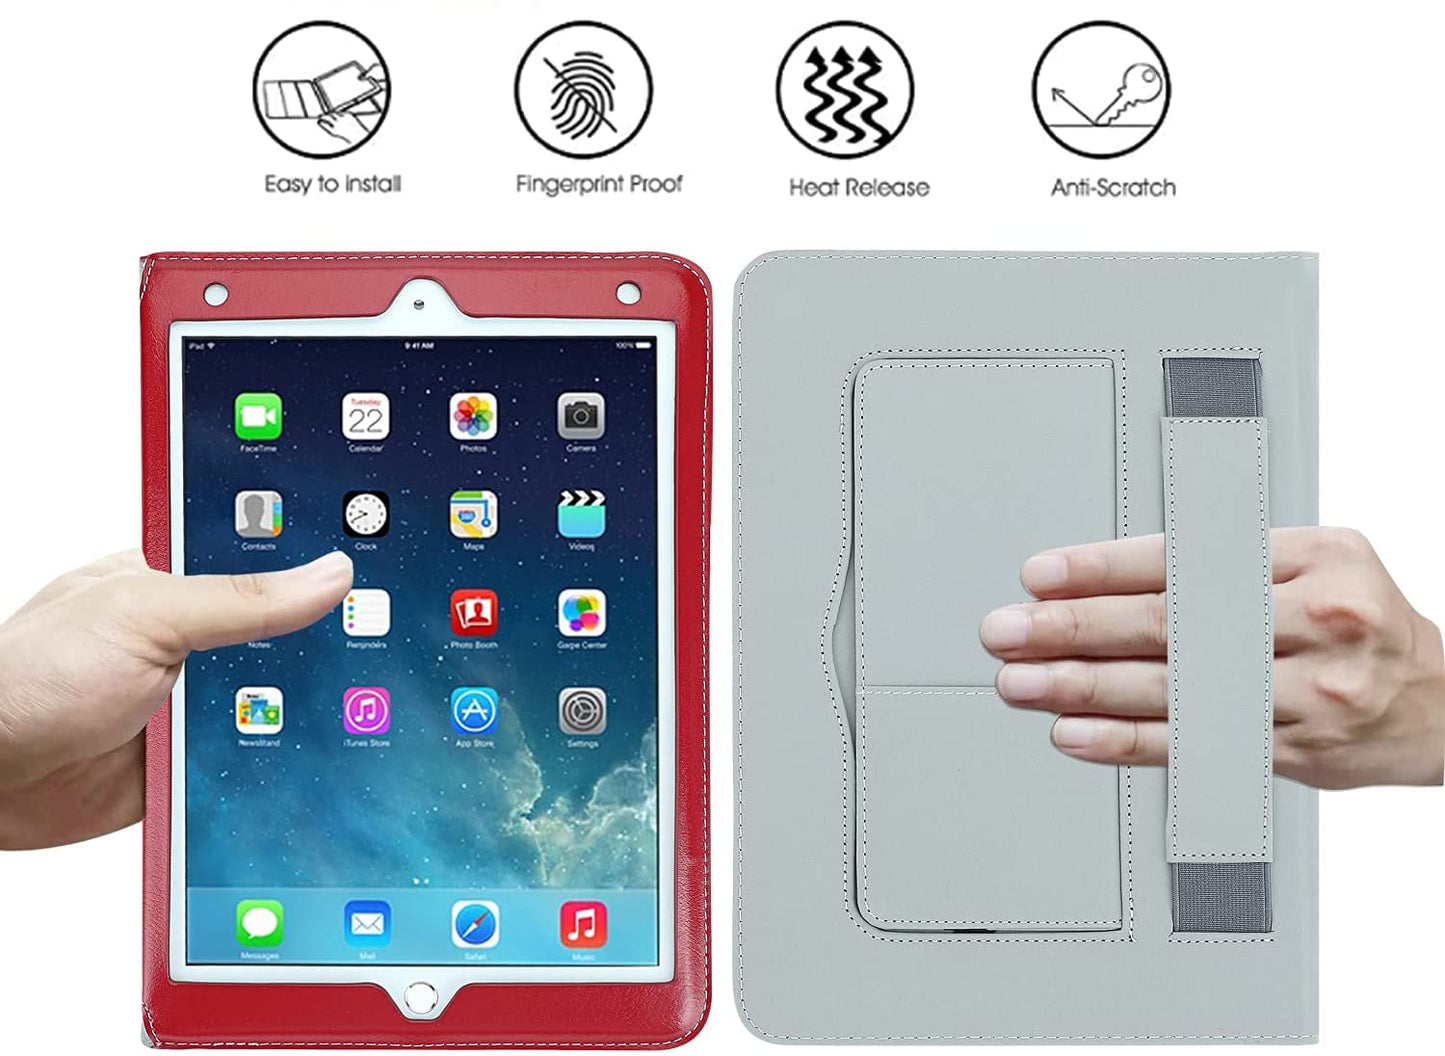 iPad 9.7 inch Magnetic Closure PU Leather Cover Case for iPad 2/3/4